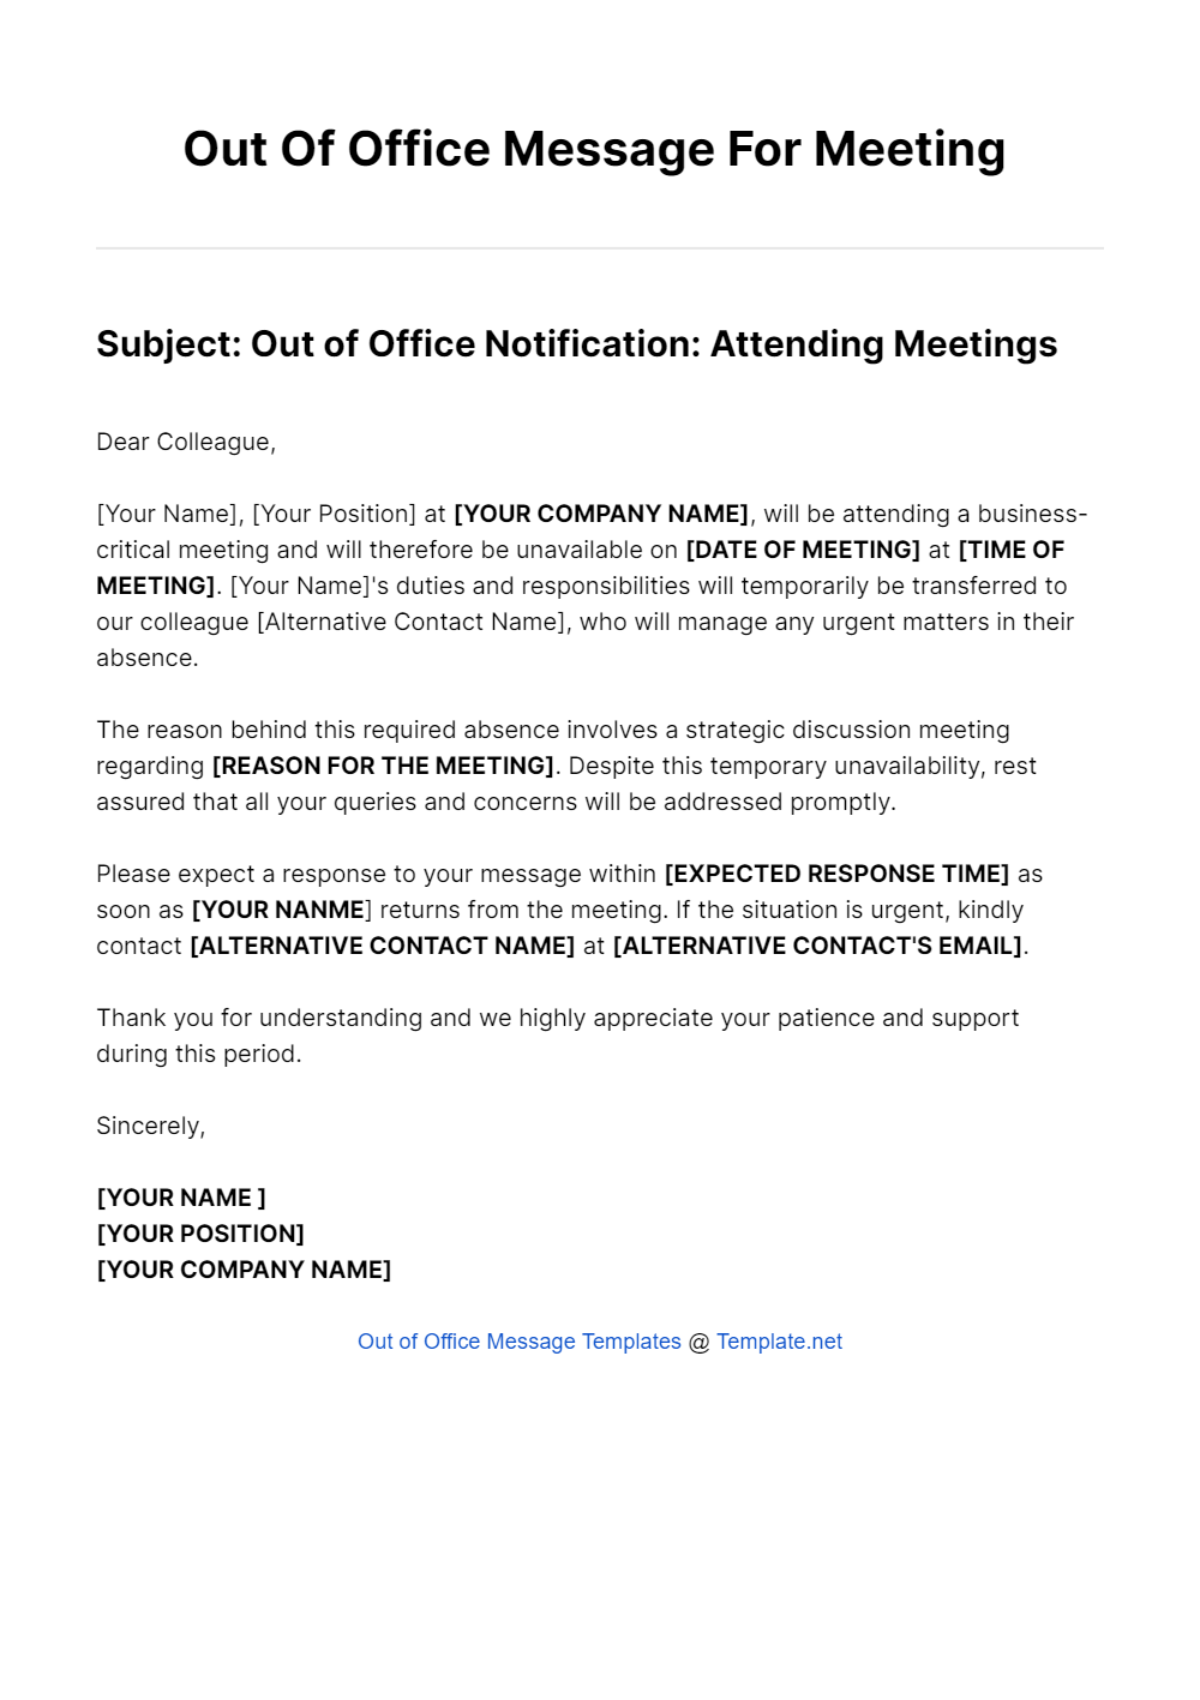 Out Of Office Message For Meeting Template